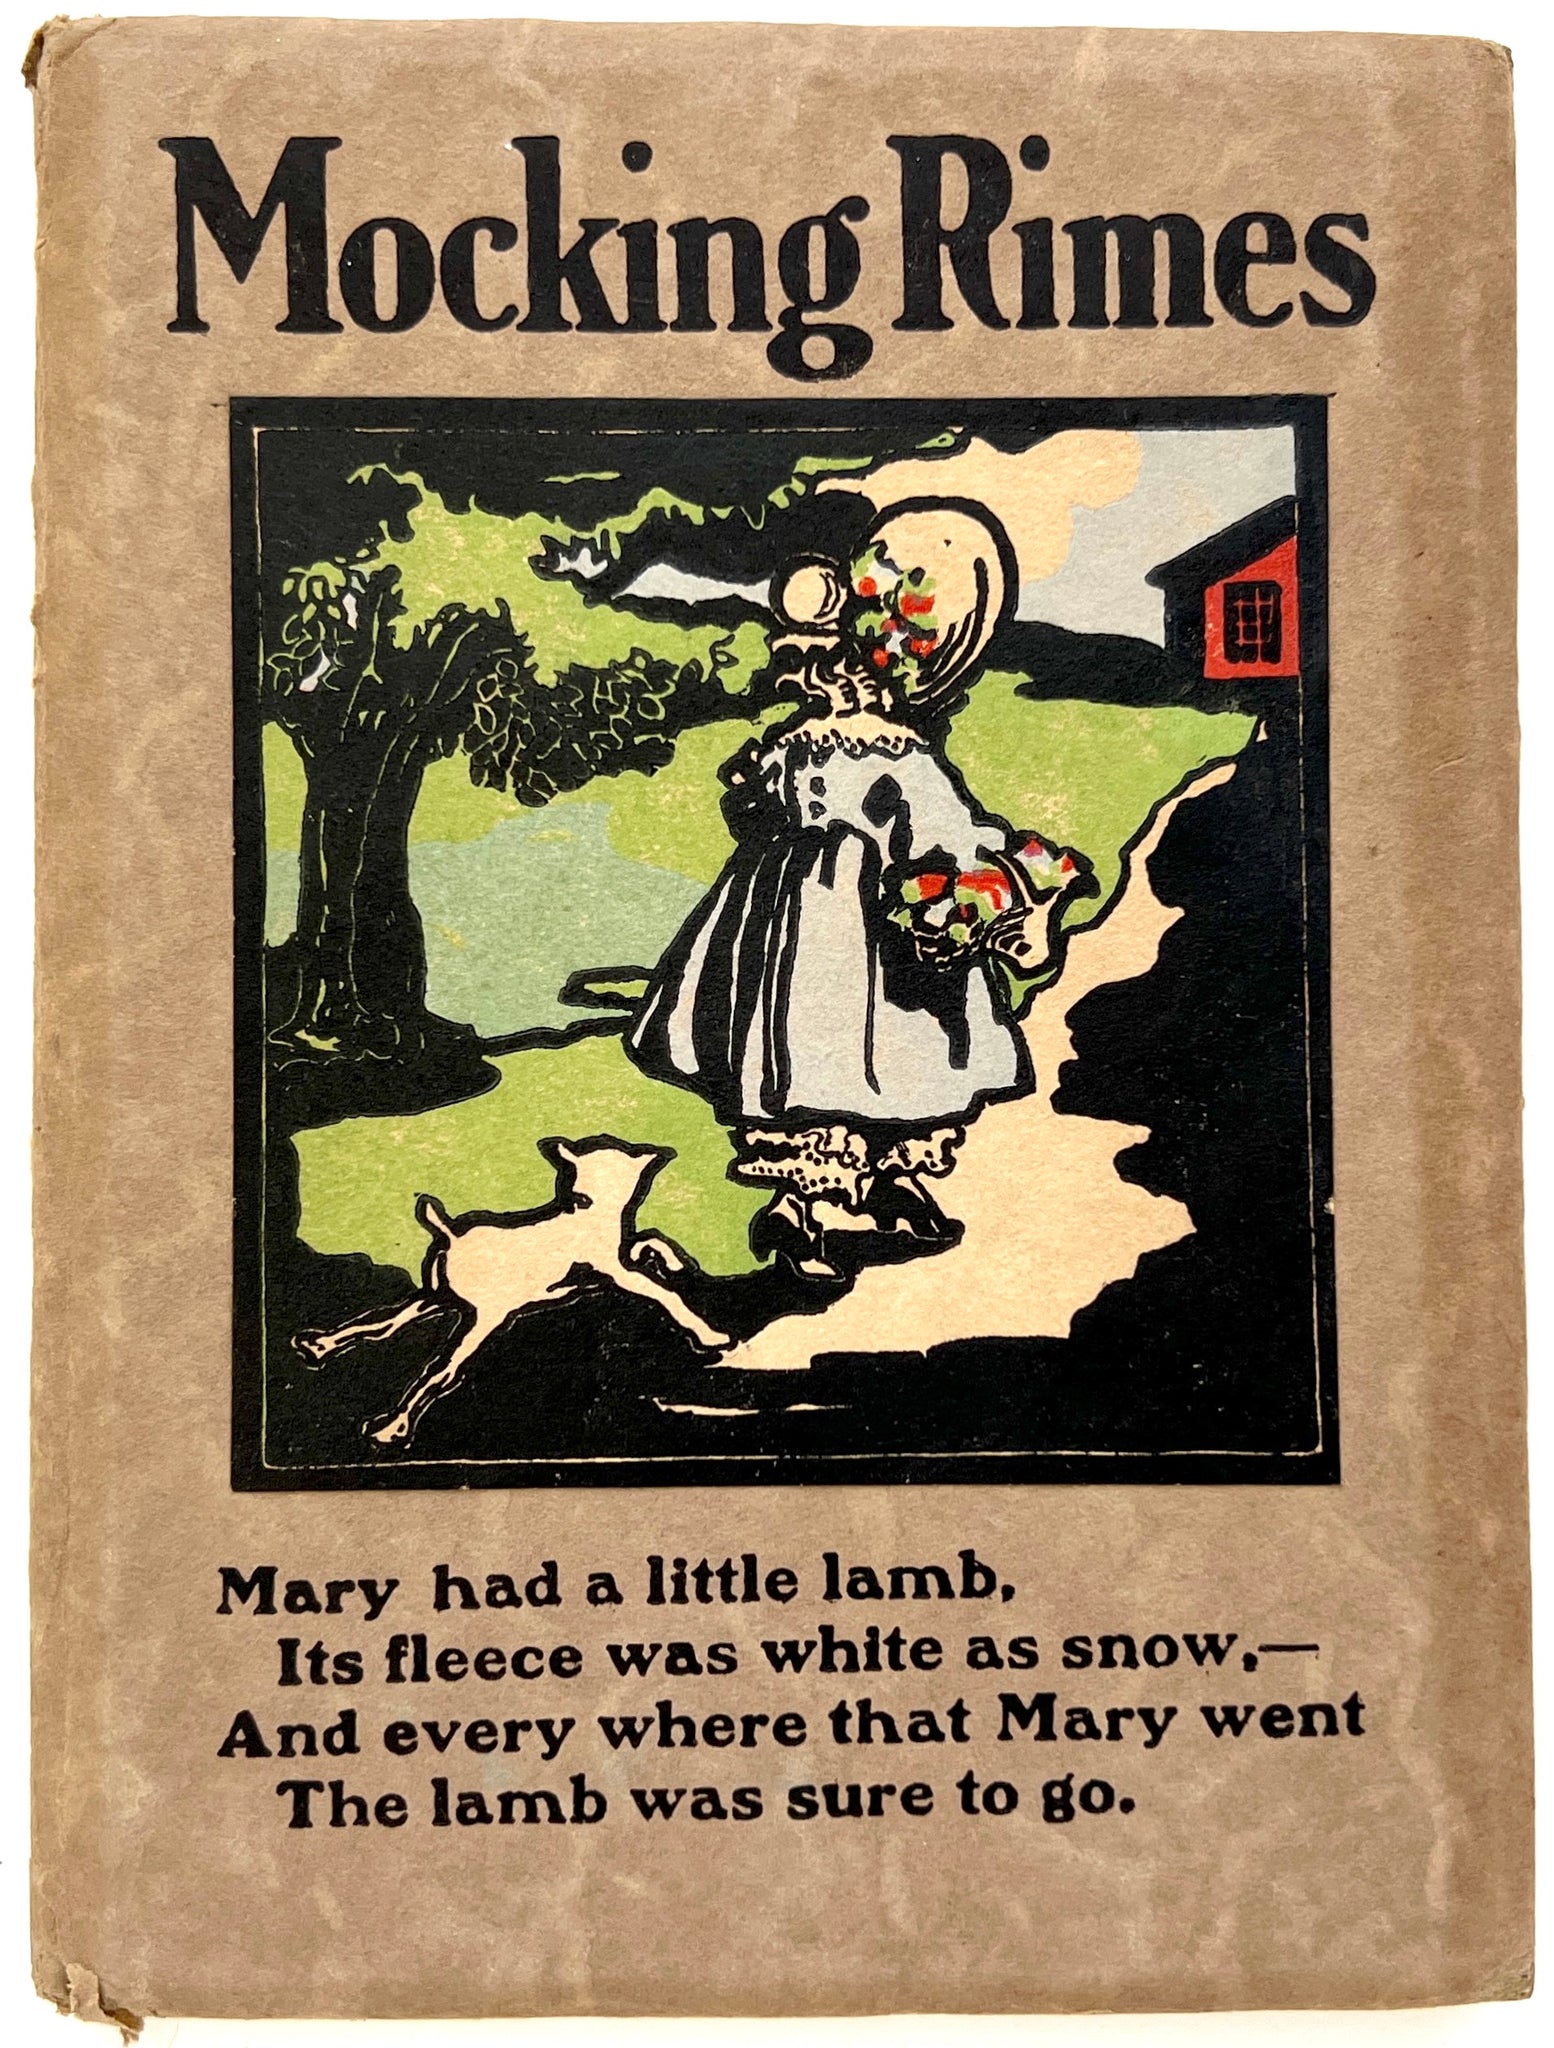 Mocking Rimes: Some Parodies on Mary had a little lamb...